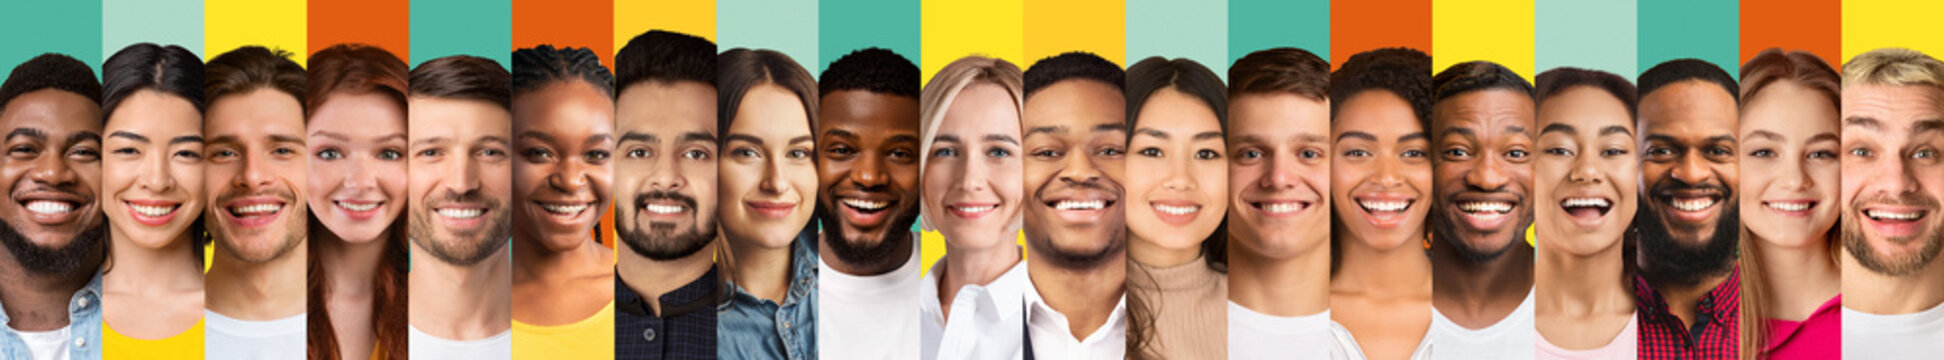 Row Of Multiple People Faces In Collage On Colorful Backgrounds